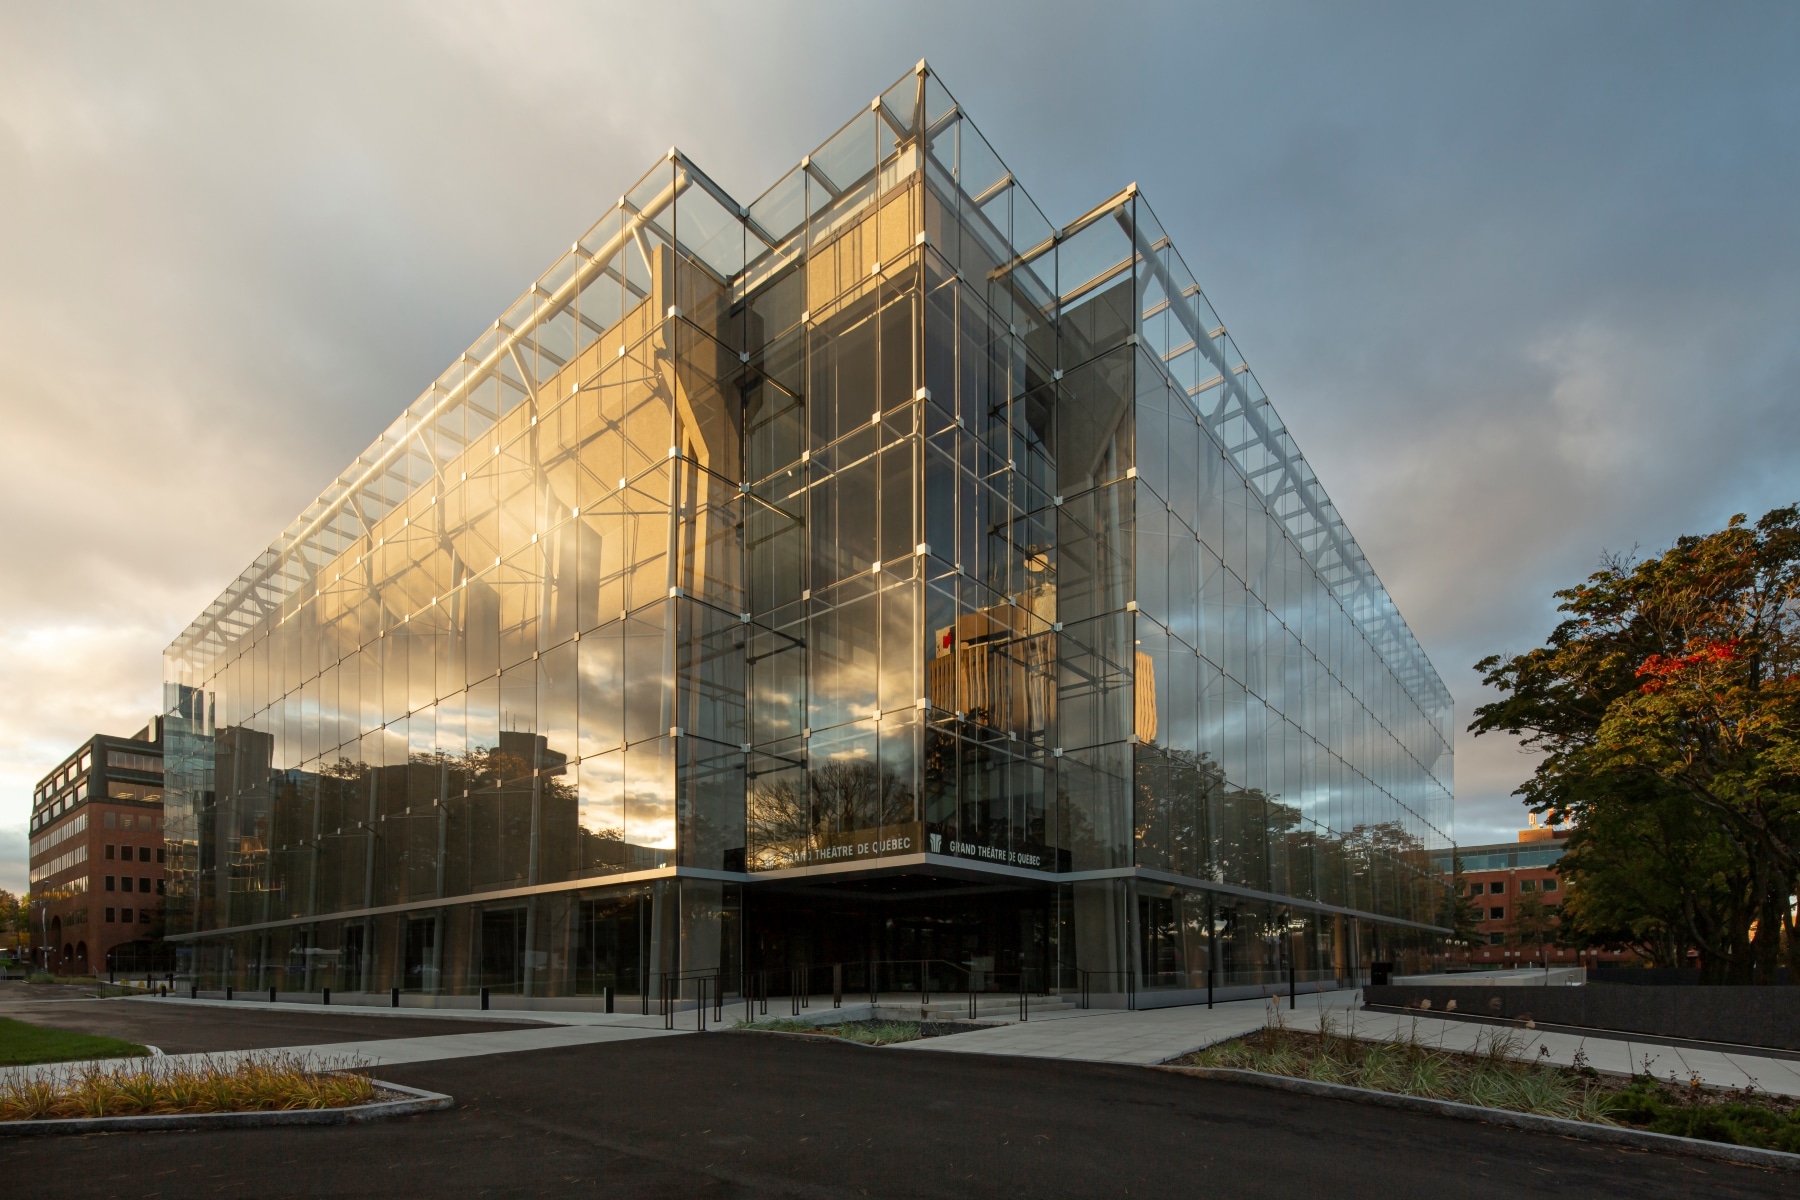 grand-theatre-quebec-lemay-atelier-21-architecture-conservation-credit-stephanegroleau-corner-facade-glass-wall-structure-07